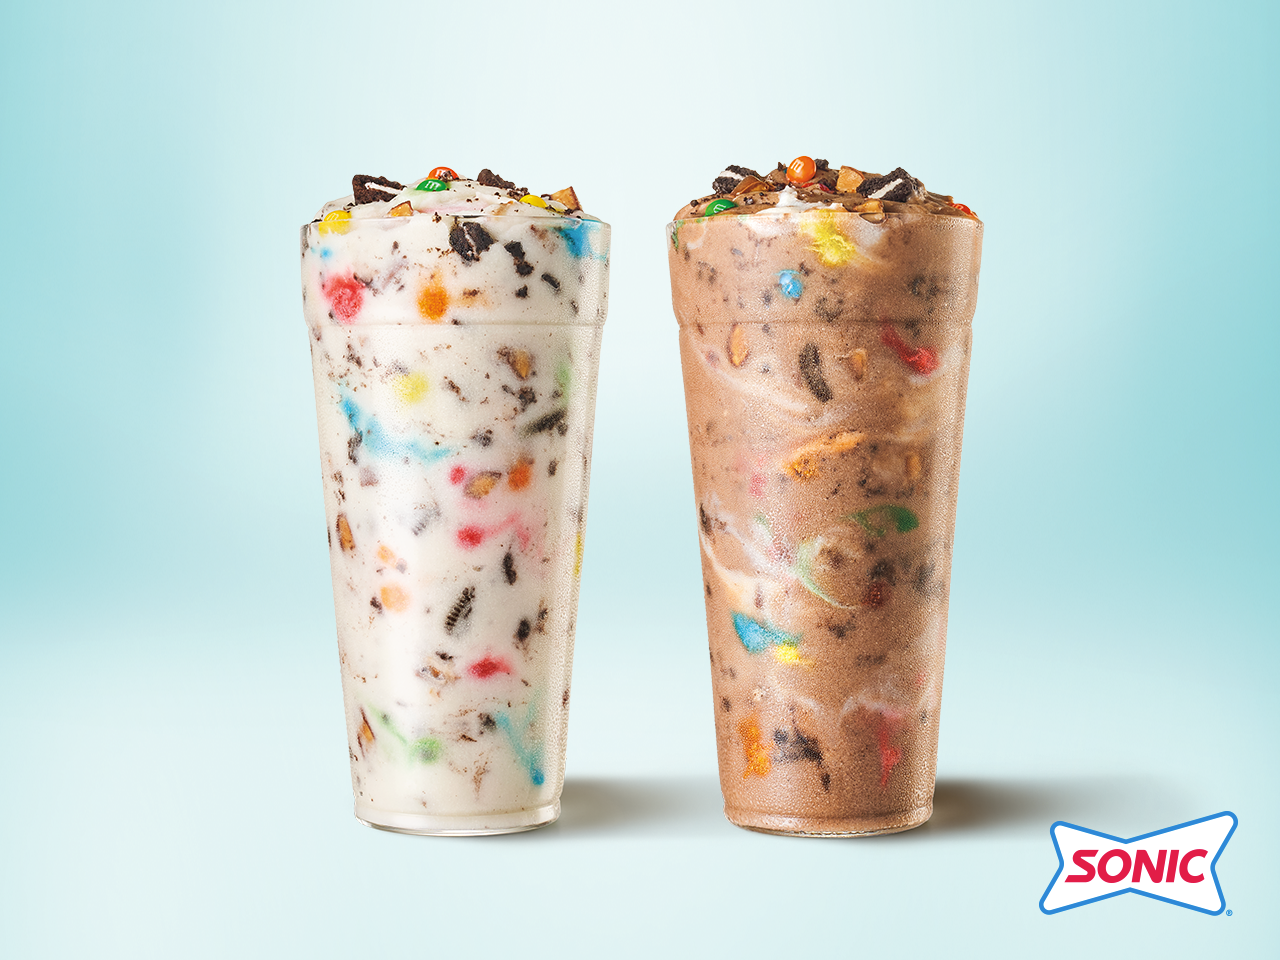 Sonic Drive-In's new 'scary good' ice cream features three favorite treats  